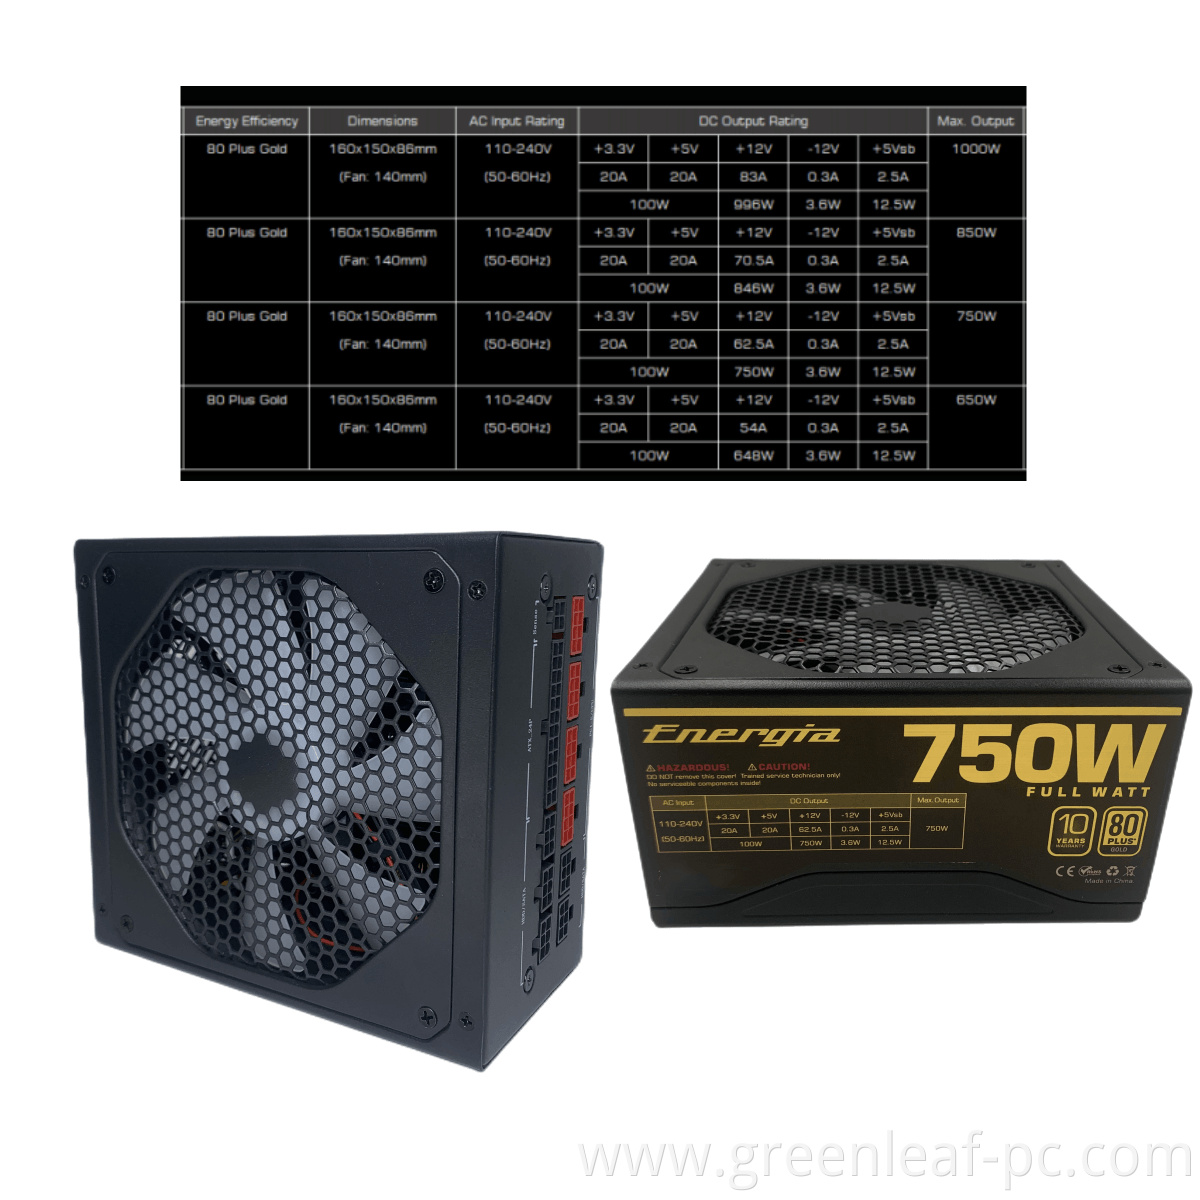 Fast shipment 750w Gold pc power supply